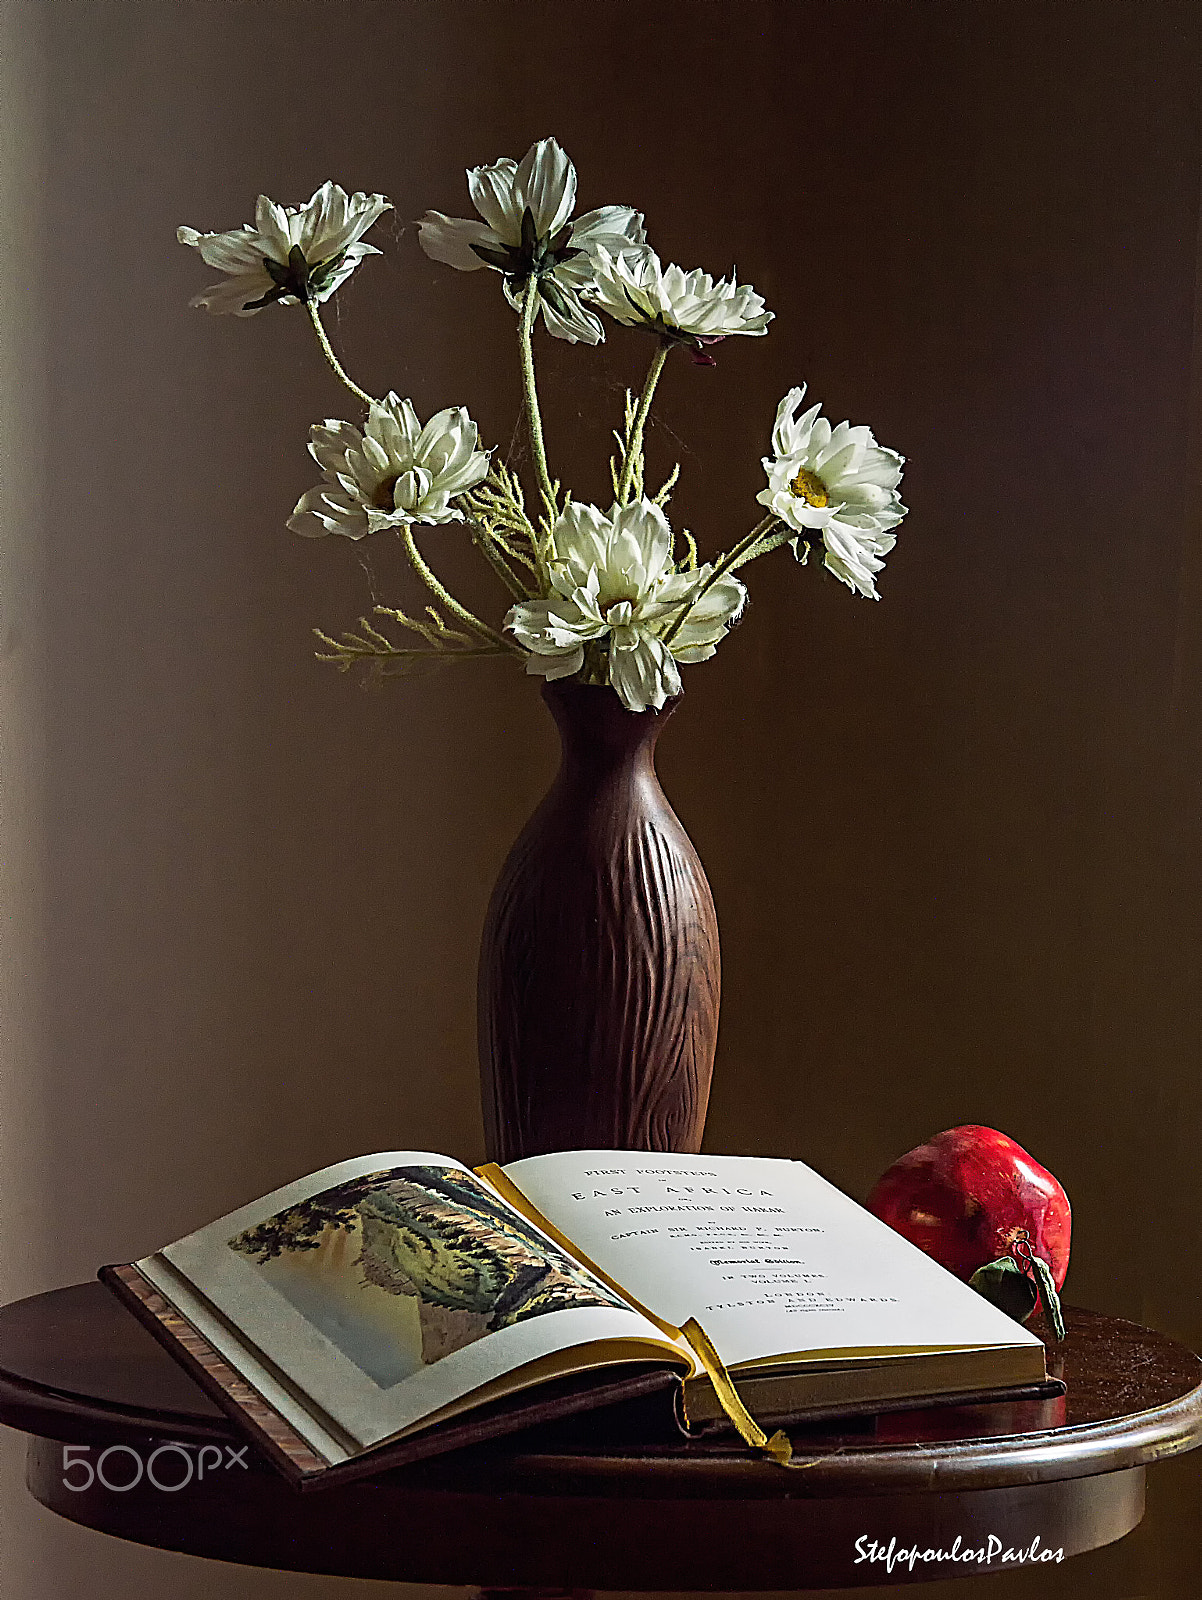 Nikon D3200 sample photo. The vase of flowers and a book photography